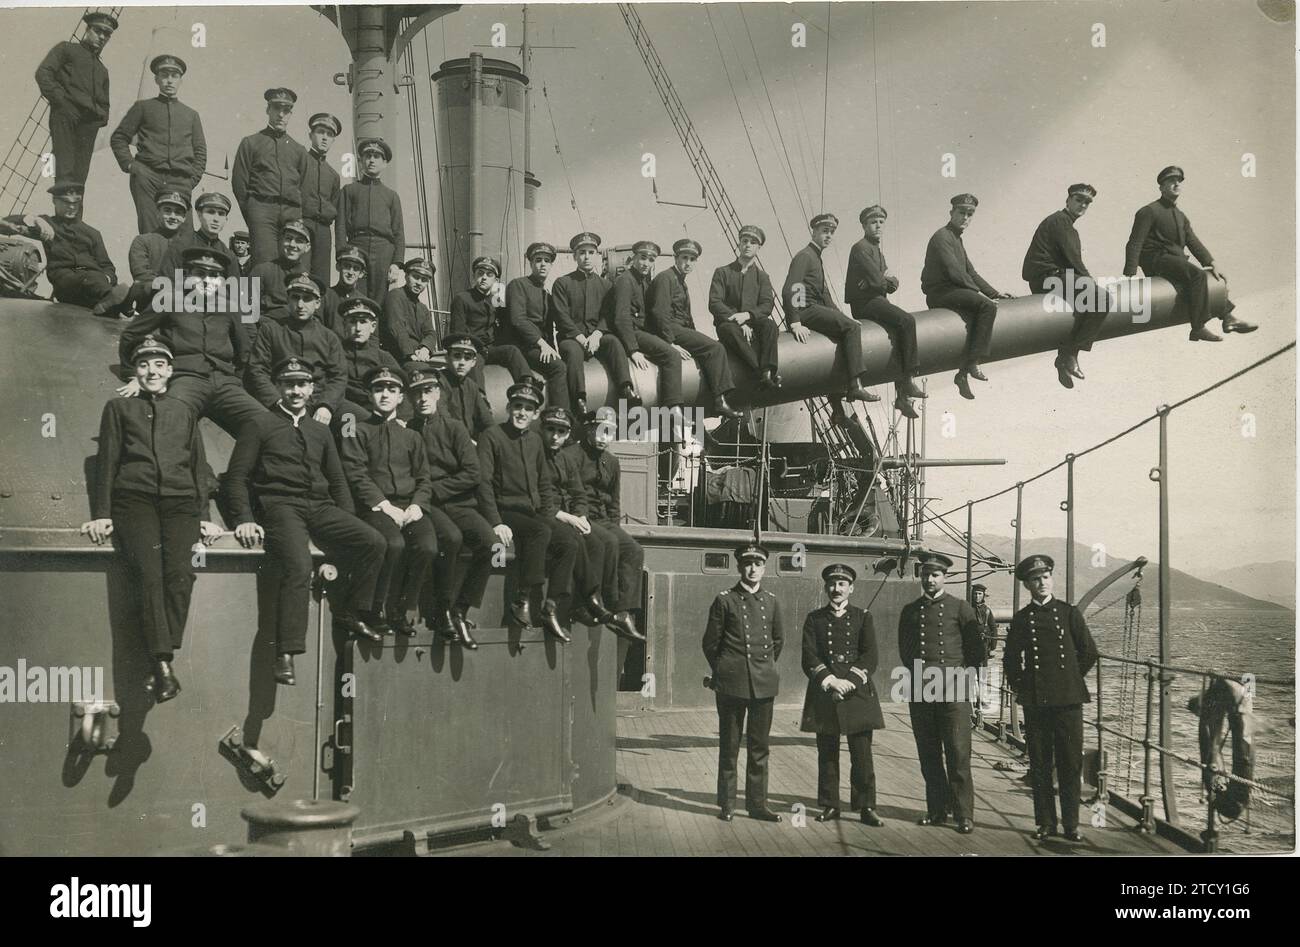 Vigo, June 1919. Aboard the 'Carlos V'. The Marine Guards of the Training Ship with some of the officers. Credit: Album / Archivo ABC / Rodríguez Seco Stock Photo